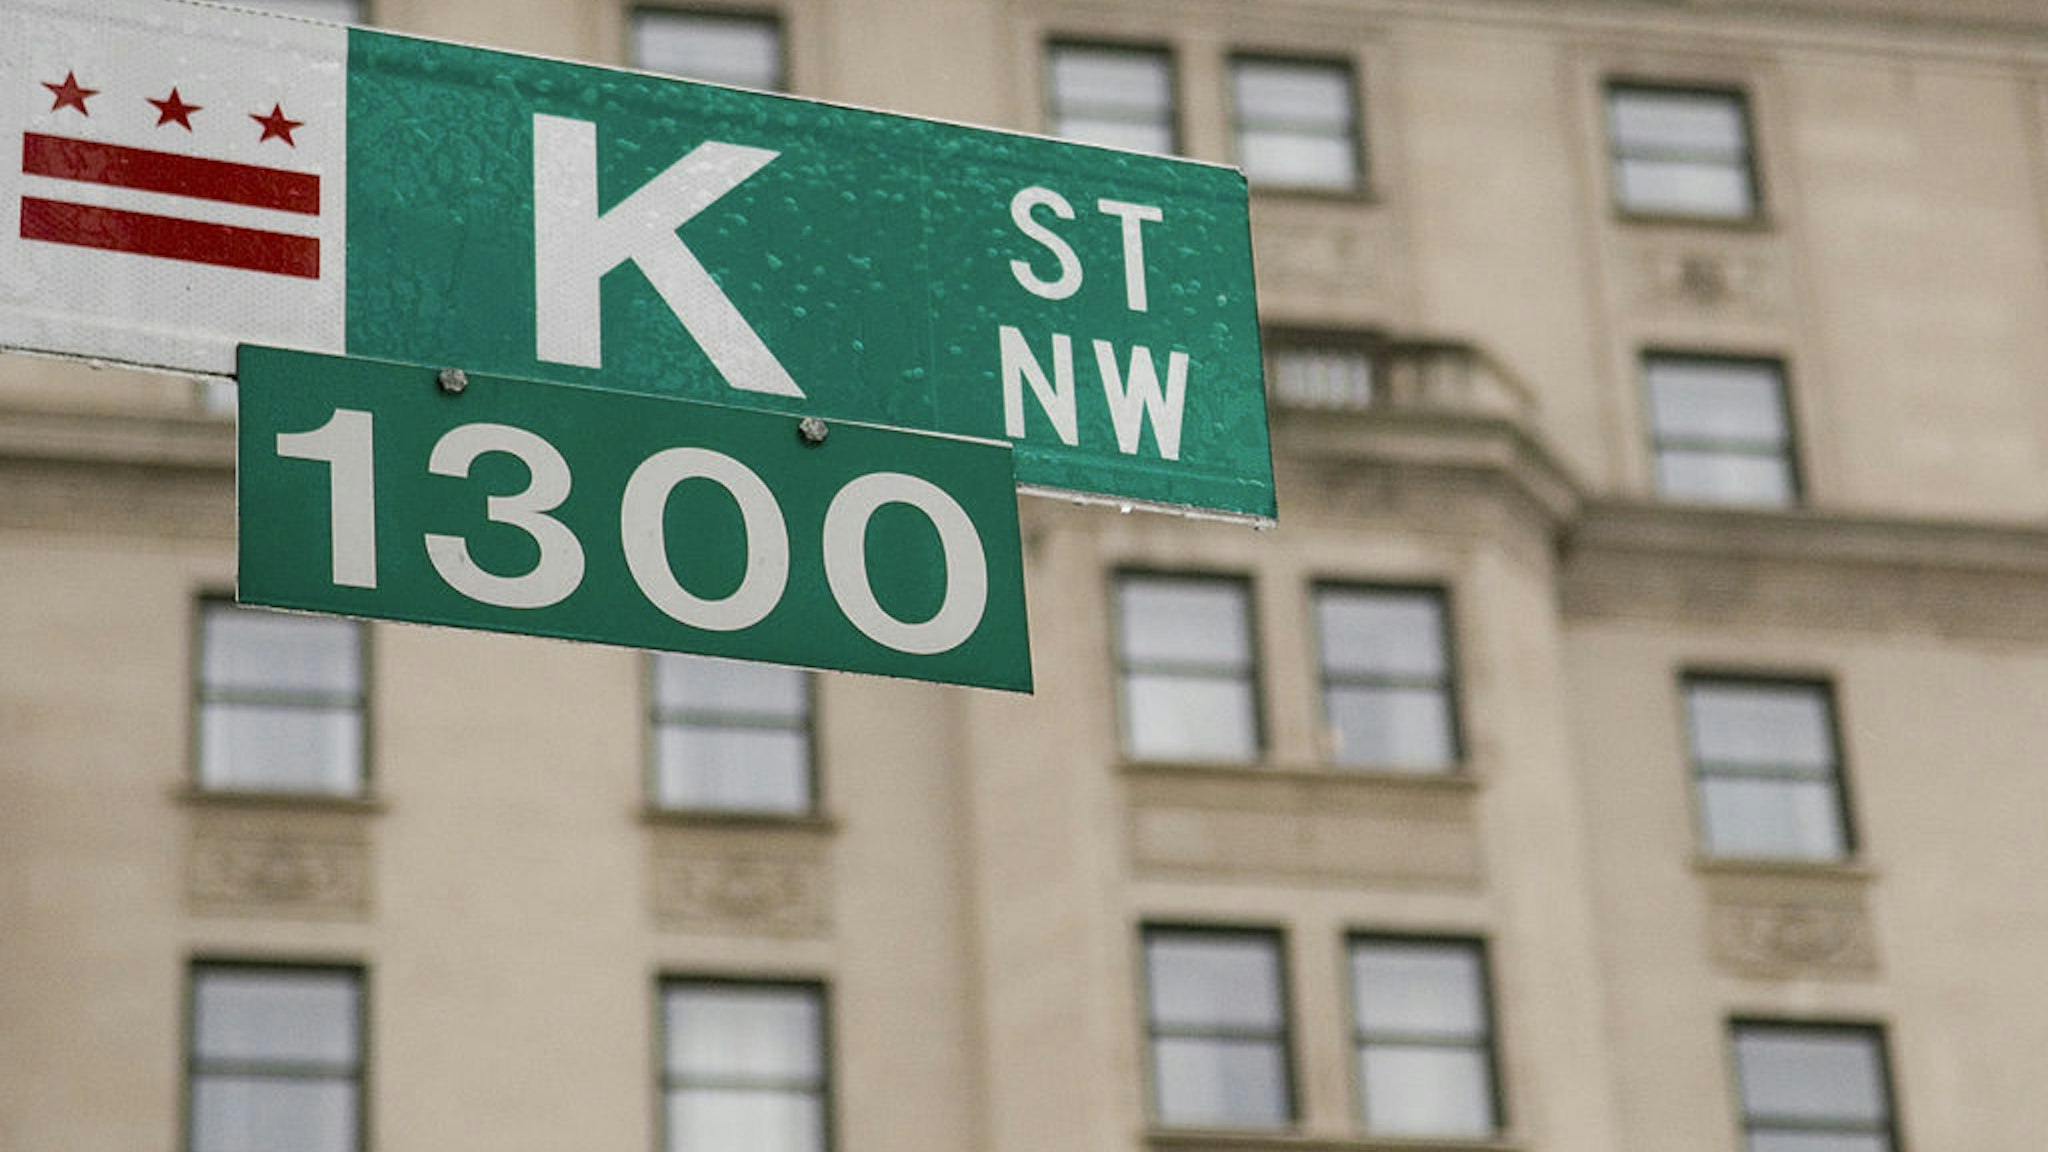 UNITED STATES - FEBRUARY 14: A thin coat of ice covers a K Street sign in Washington on Feb. 14, 2007.